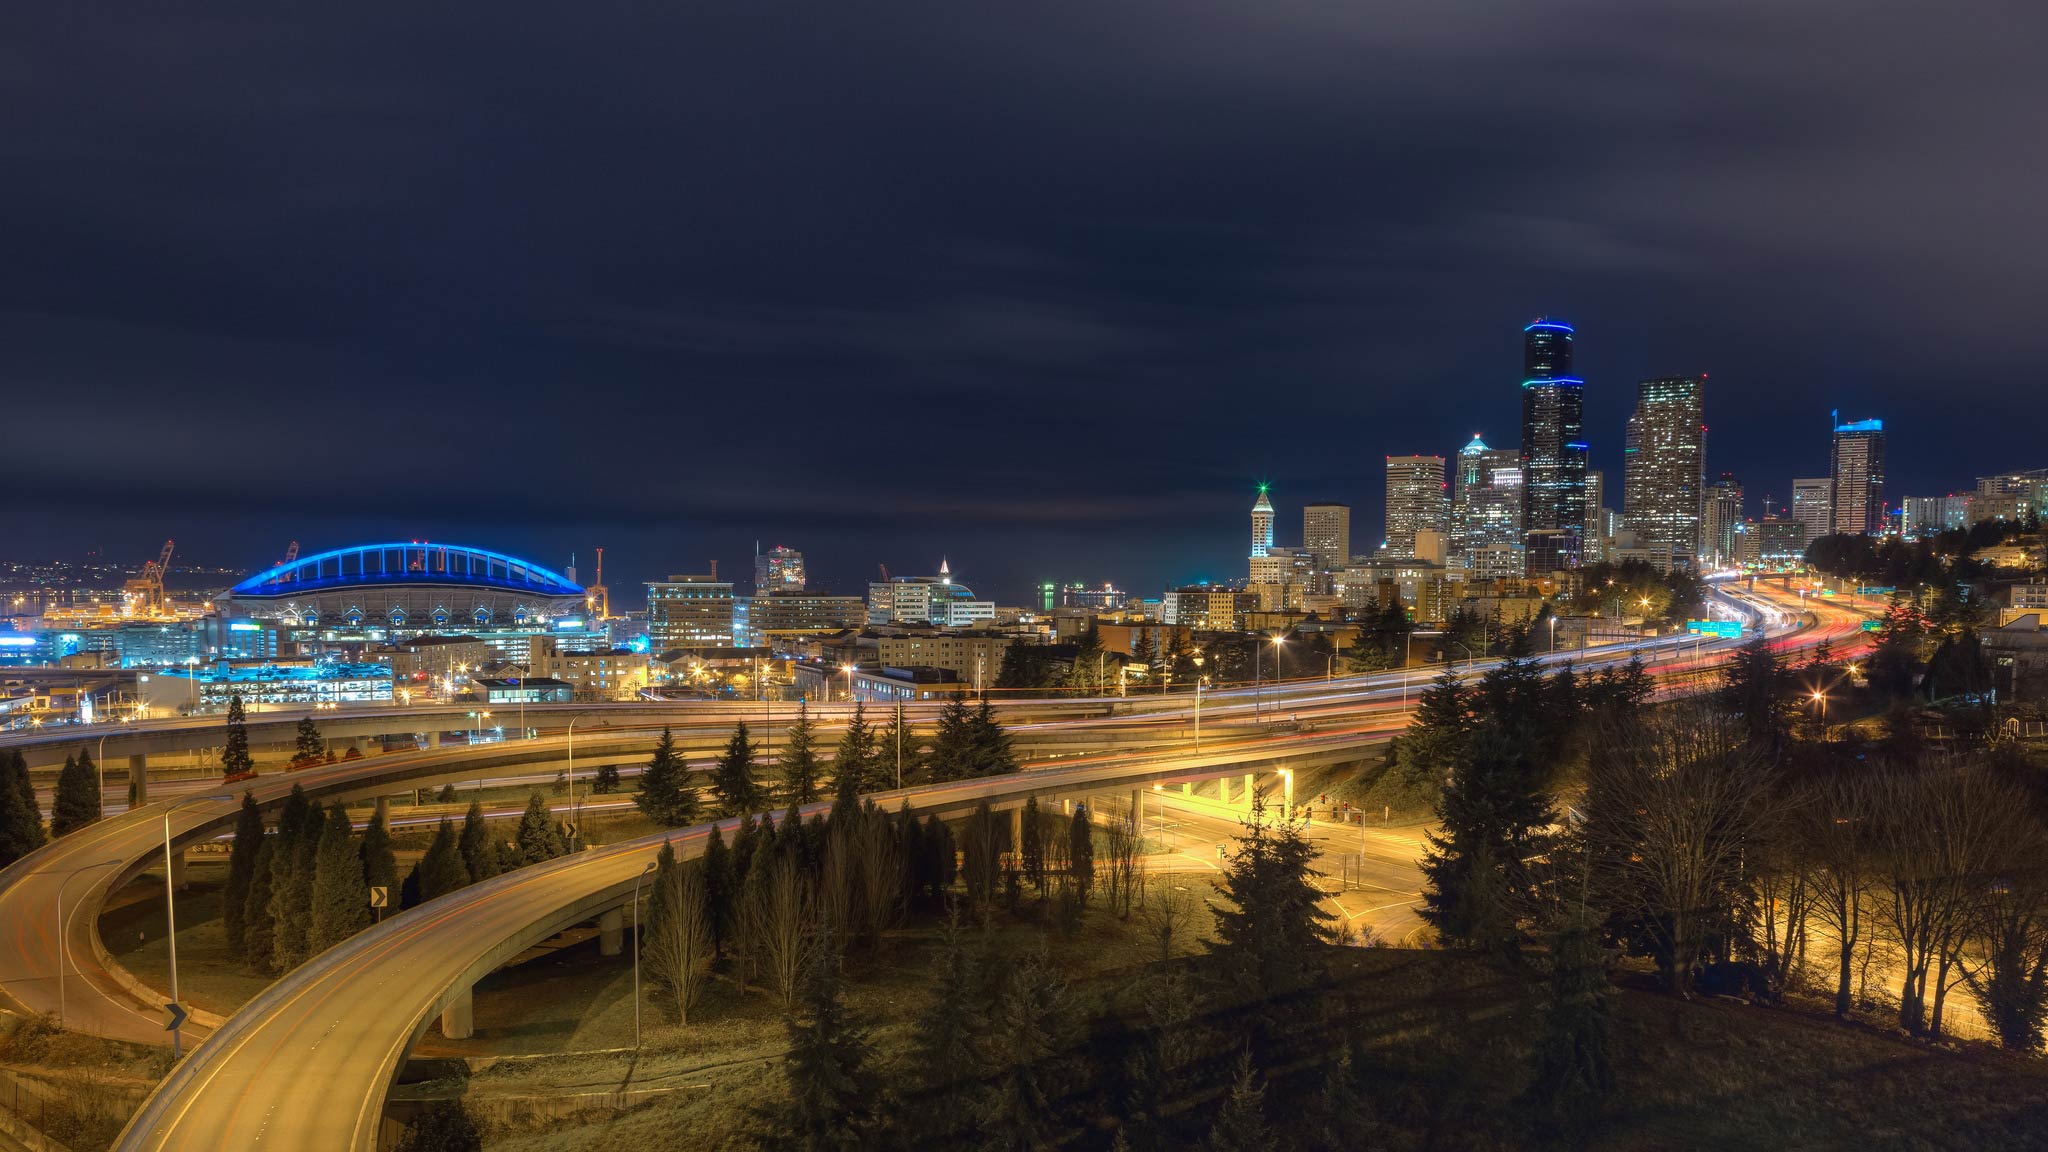 Blue lights illuminate CenturyLink Field and downtown Seattle in honor of the Seahawks game.